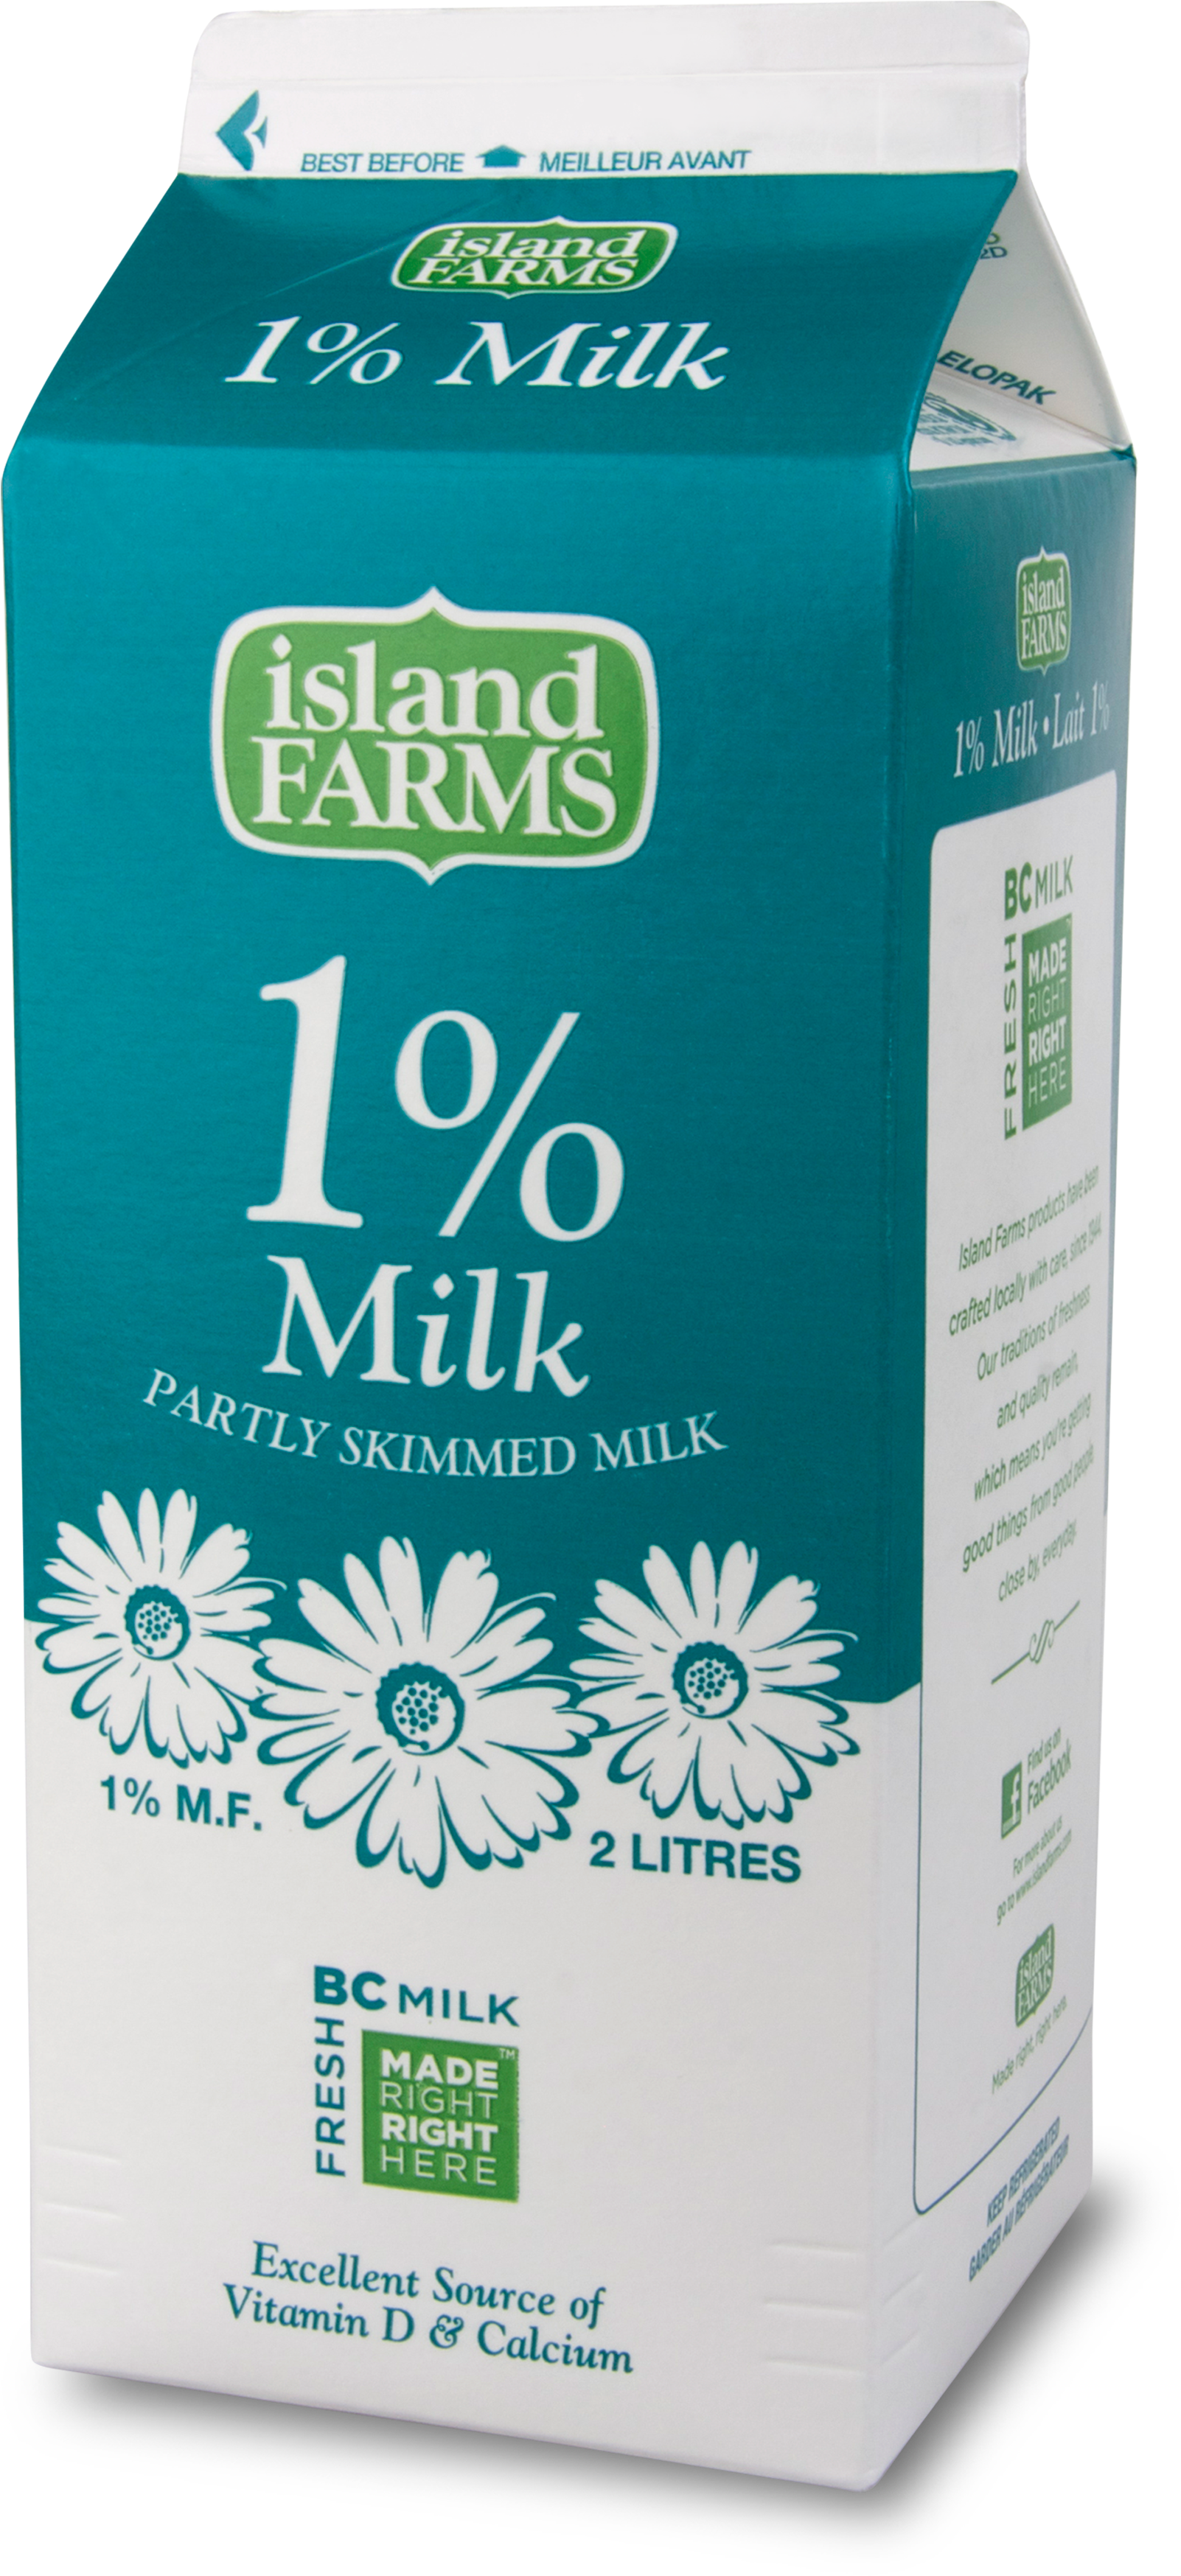 A Blue And White Carton Of Milk